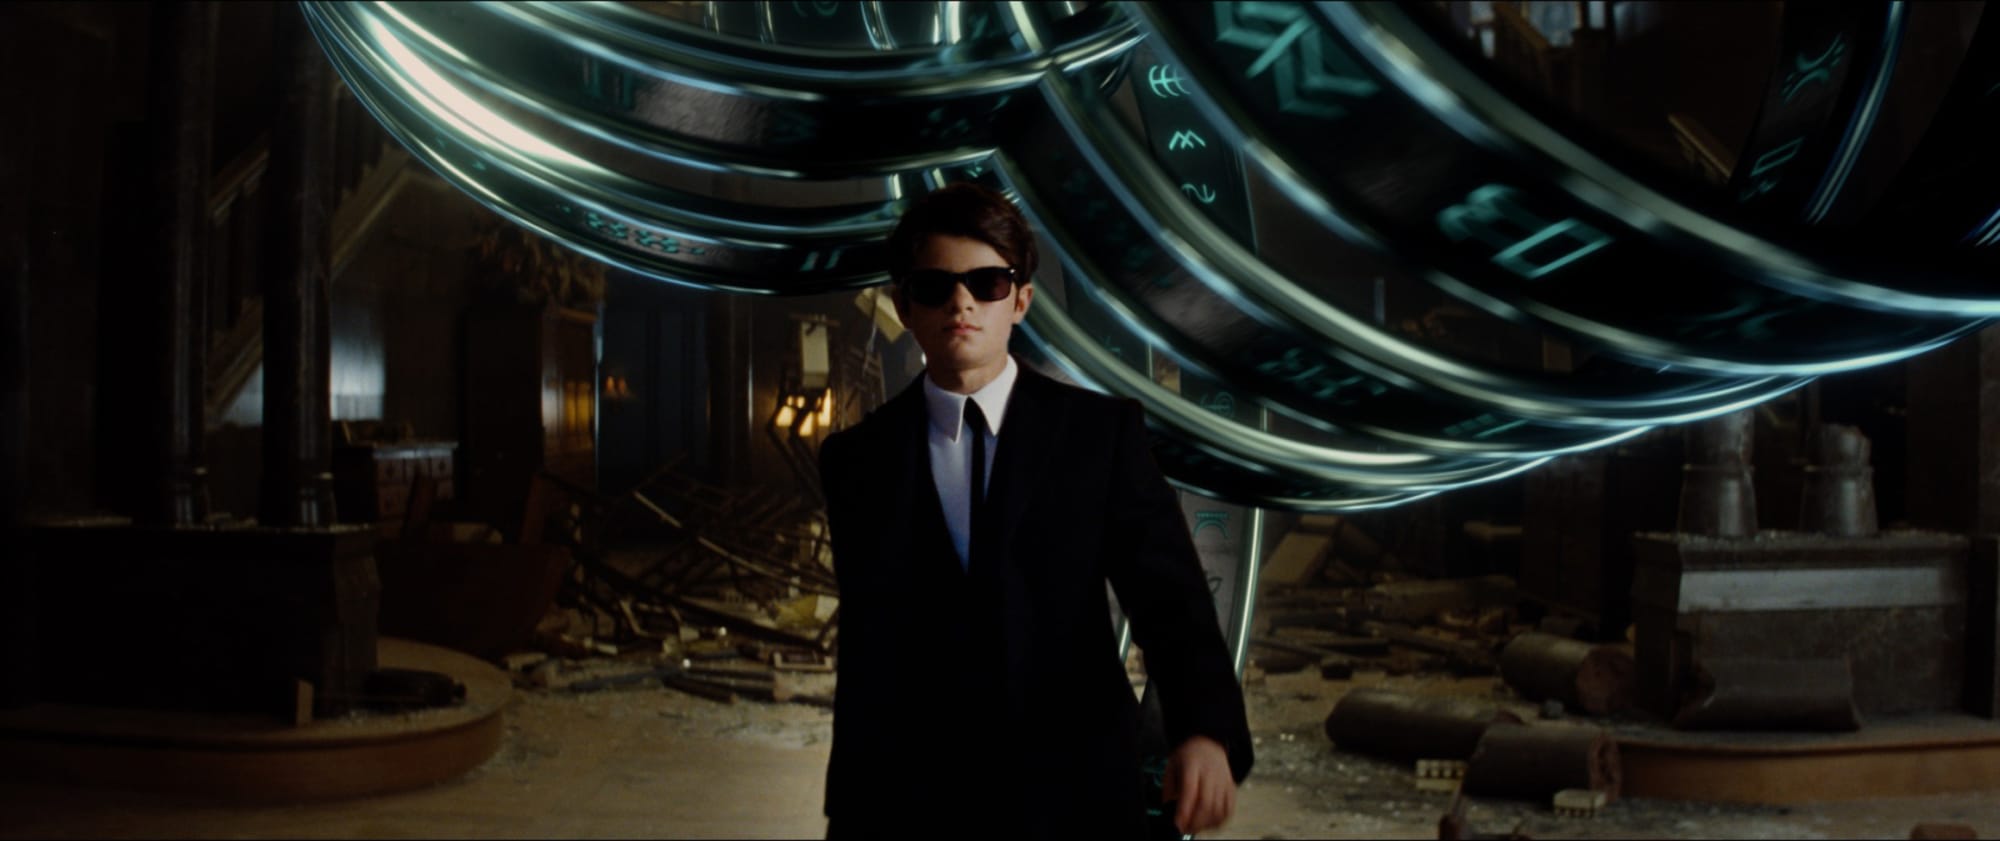 Artemis Fowl: New release date and Disney Plus details